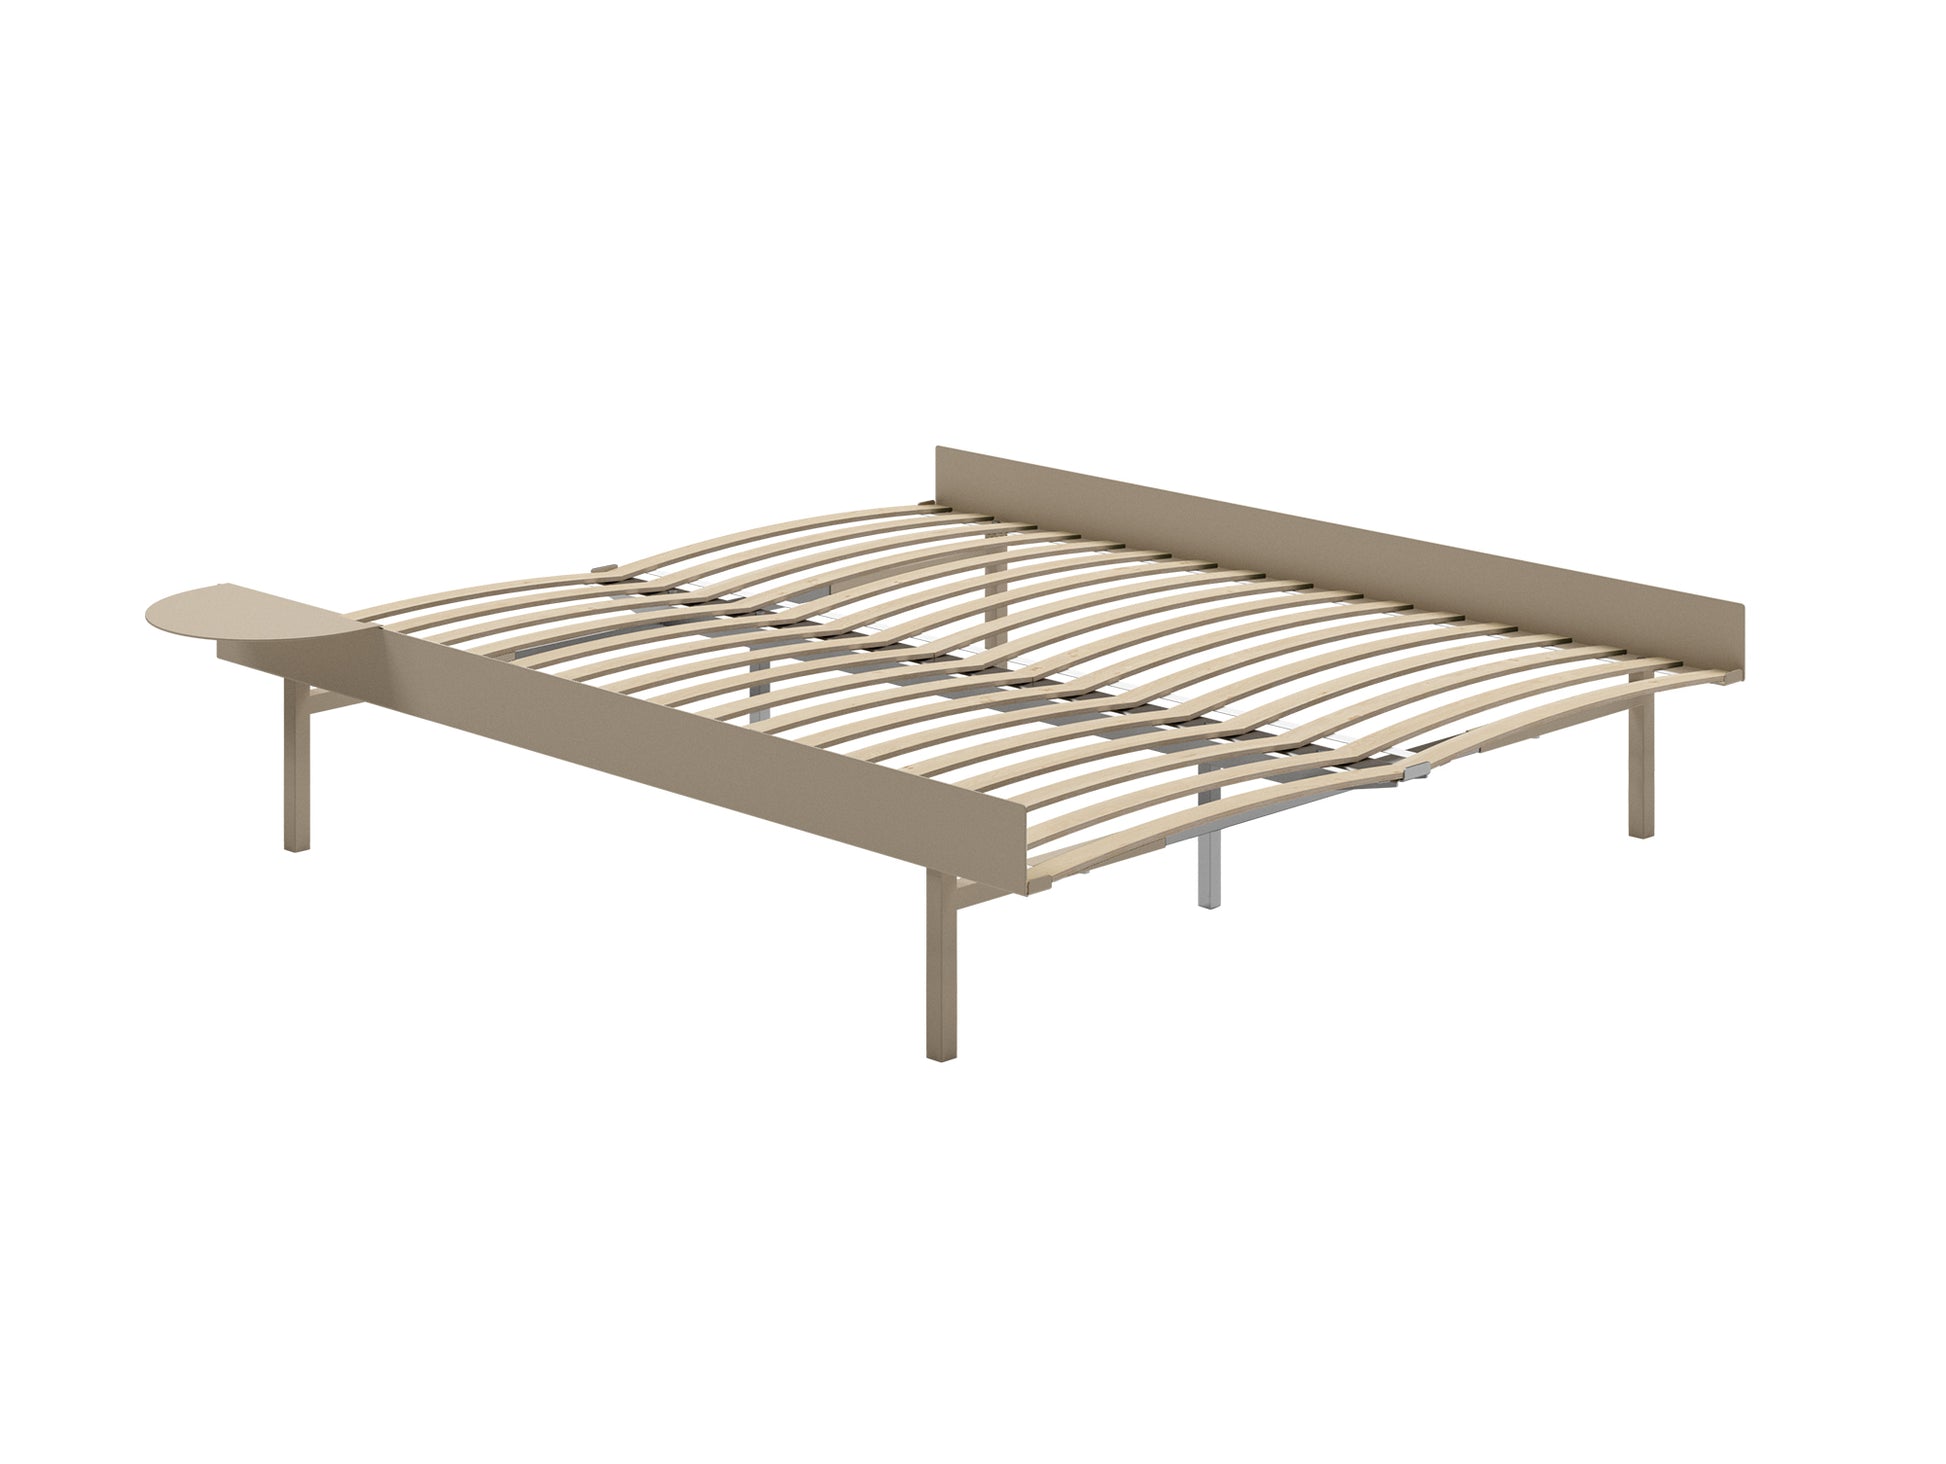 Bed 90 - 180 cm (High) by Moebe- Bed Frame / with 160cm wide Slats / 1 Side Table / Samd